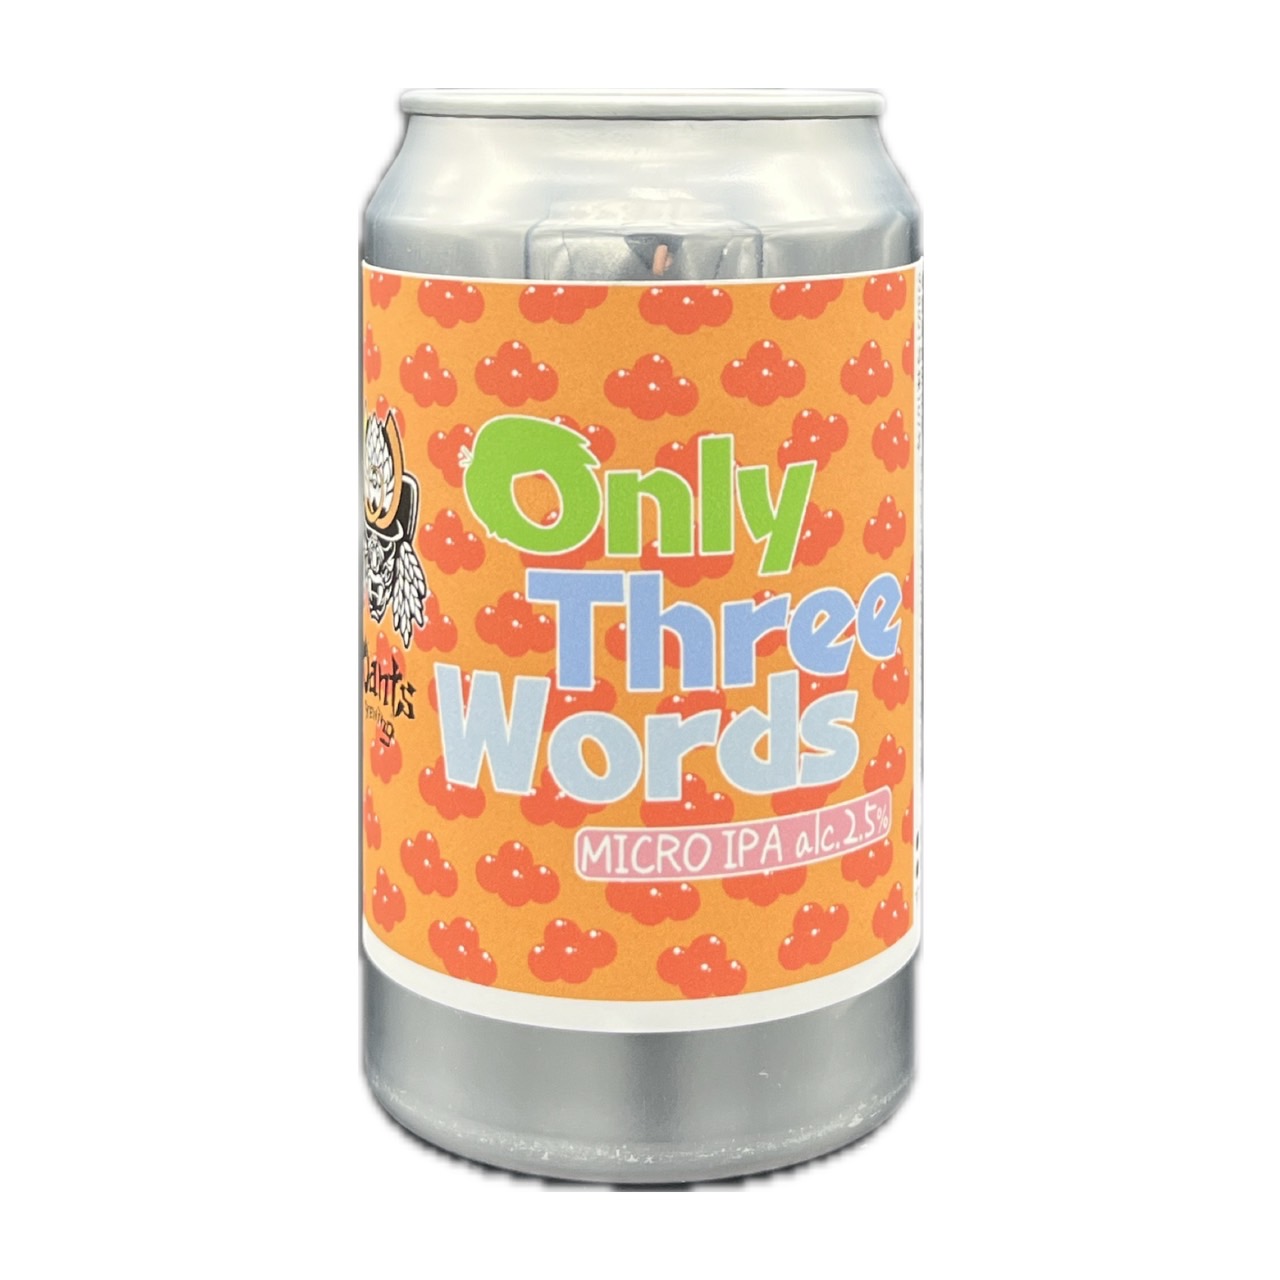 ☆Only Tree Words/10ants Brewing